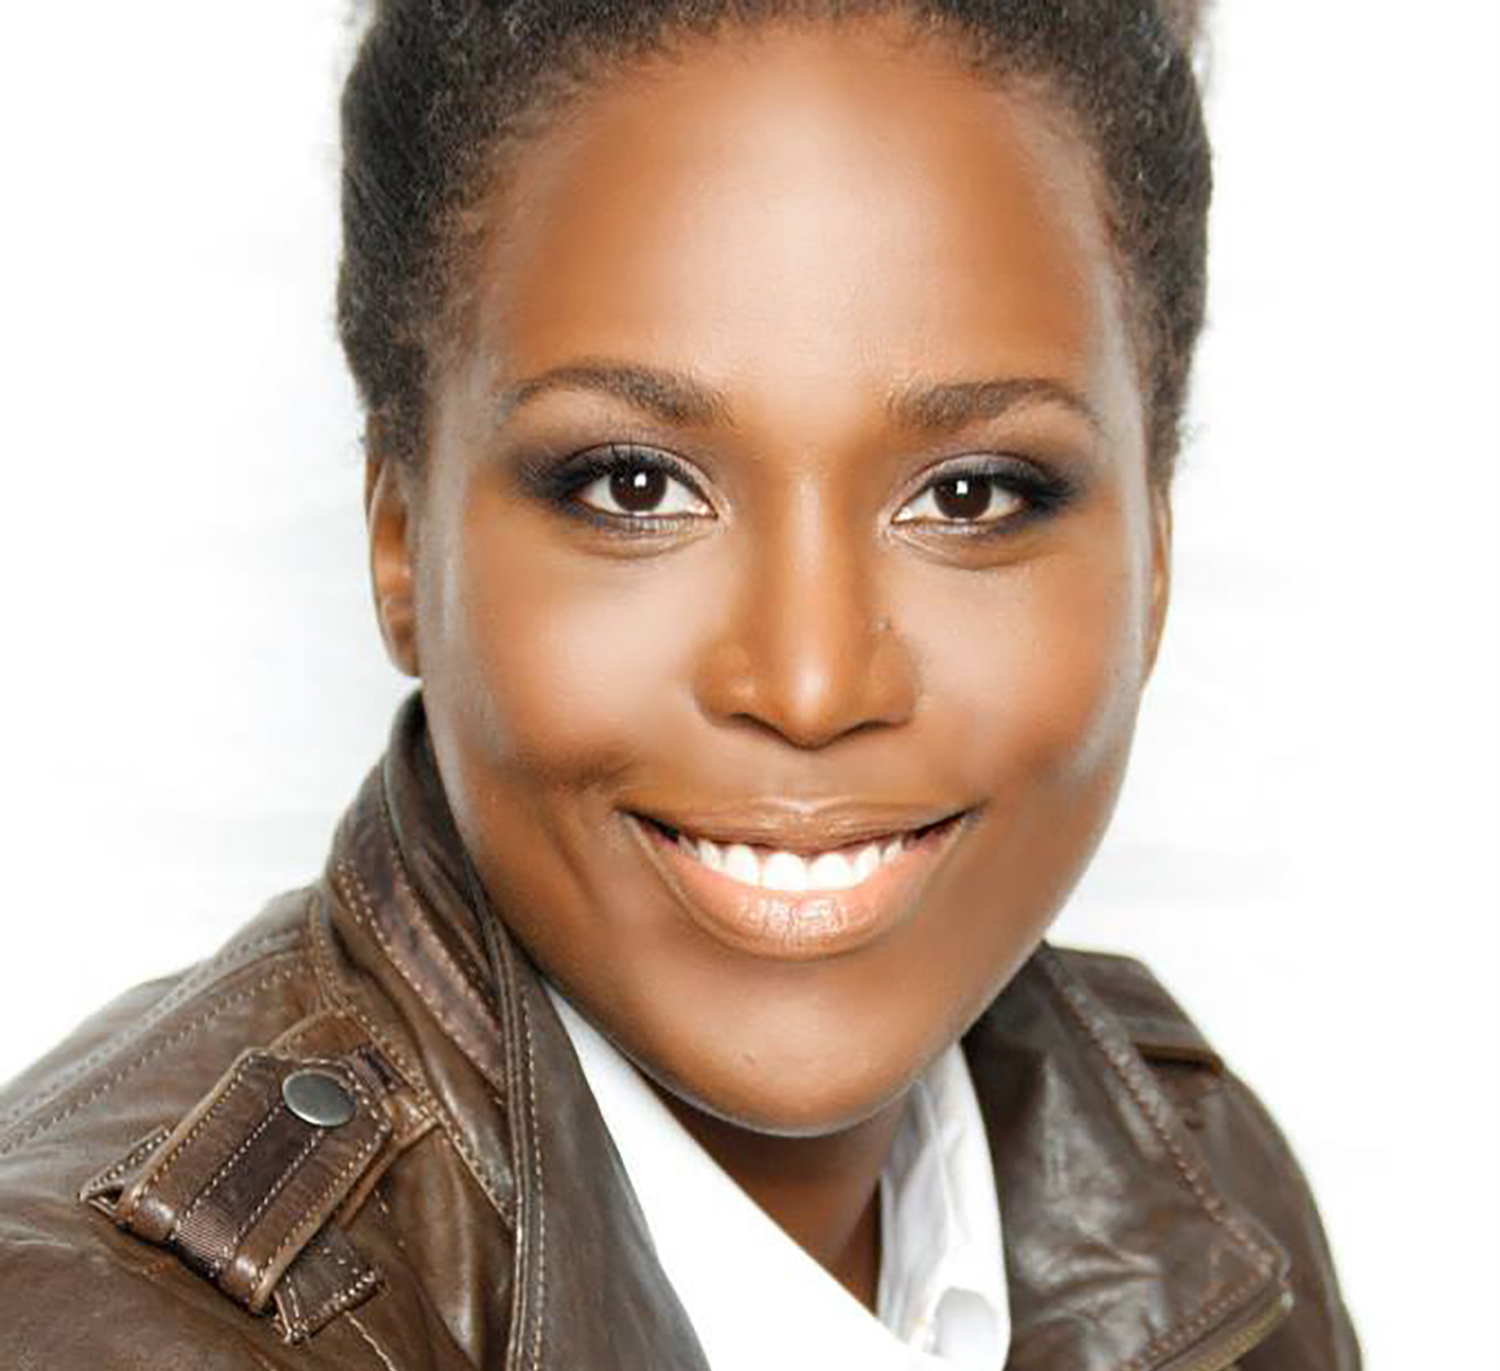 A portrait photo of a smiling woman in a brown leather jacket and white shirt.